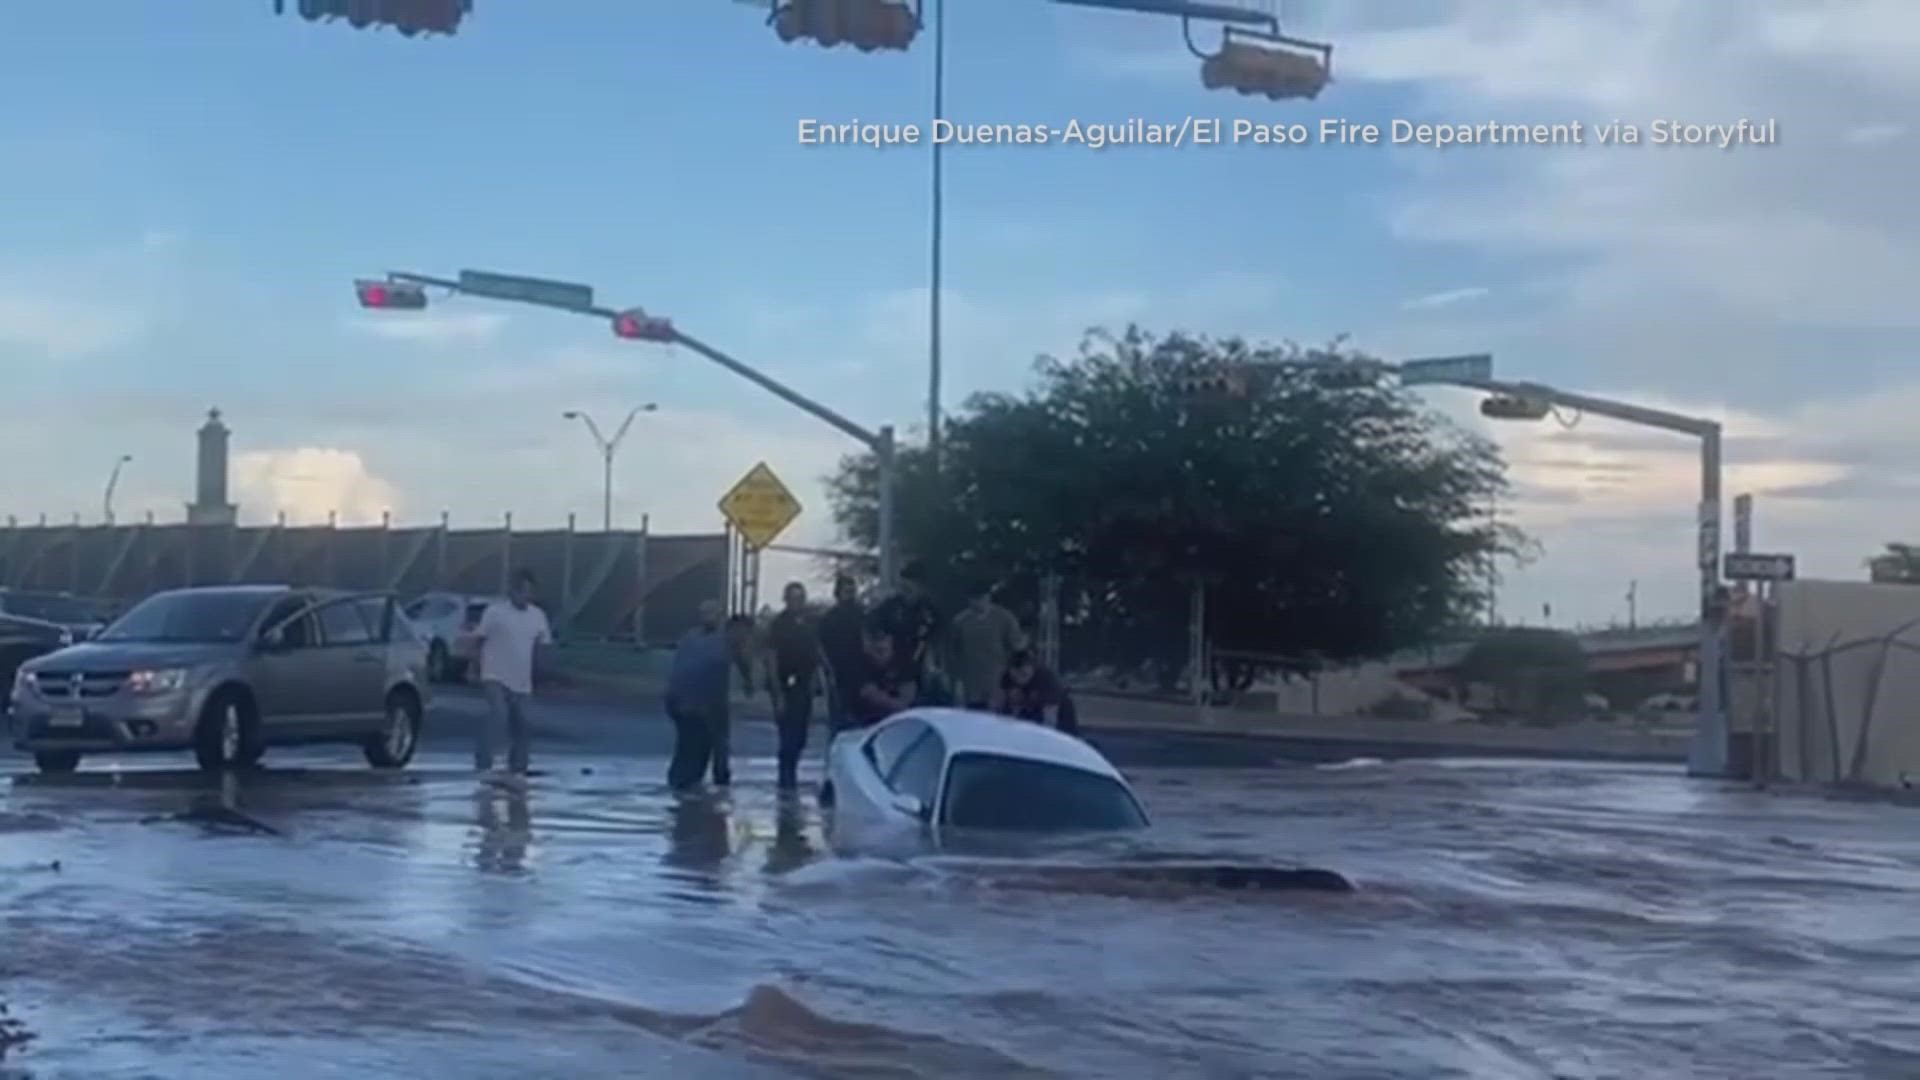 El Paso Water officials said a water main break underground caused the sinkhole in central El Paso in which a vehicle submerged and a woman had to be rescued Tuesday